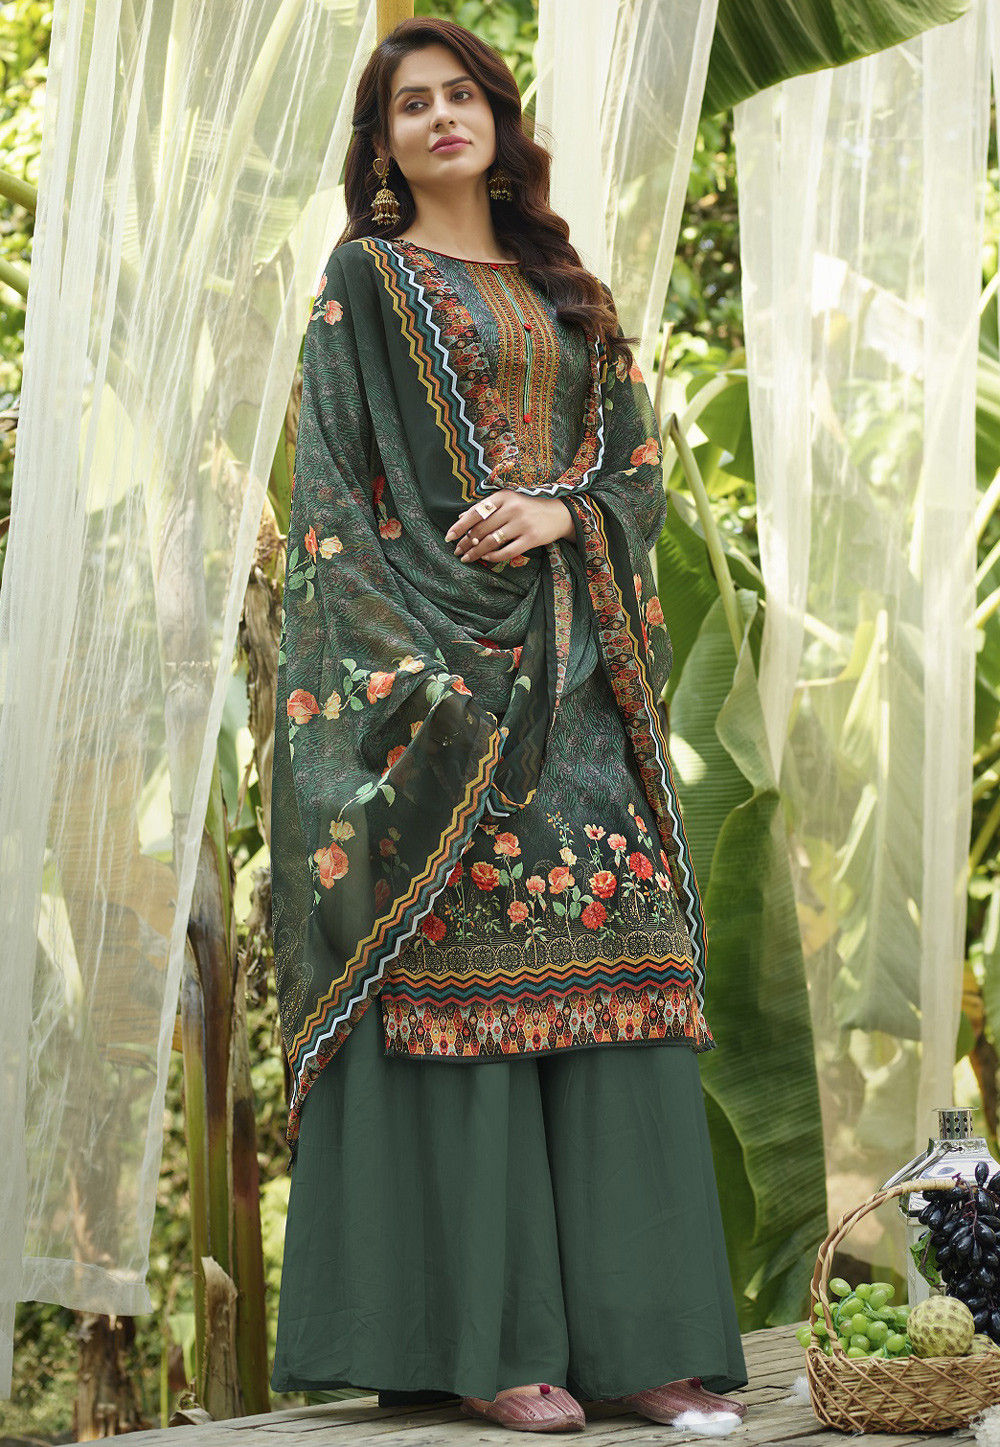 Embroidered Cotton Pakistani Suit in Dark Teal Green : KCH6189